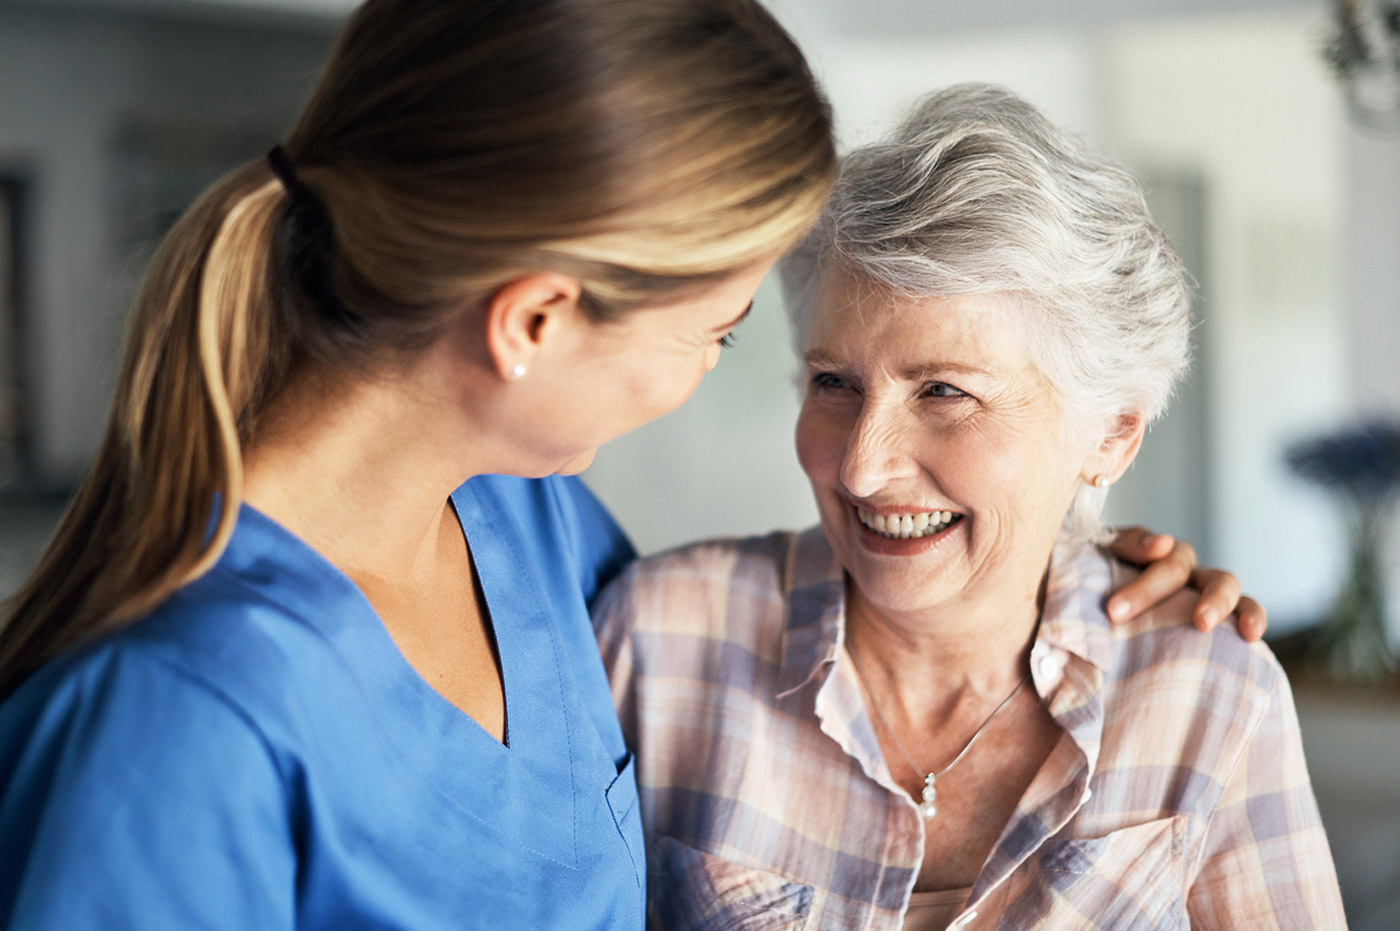 A healthcare worker with her arm around an older patient's shoulder, they are smiling.